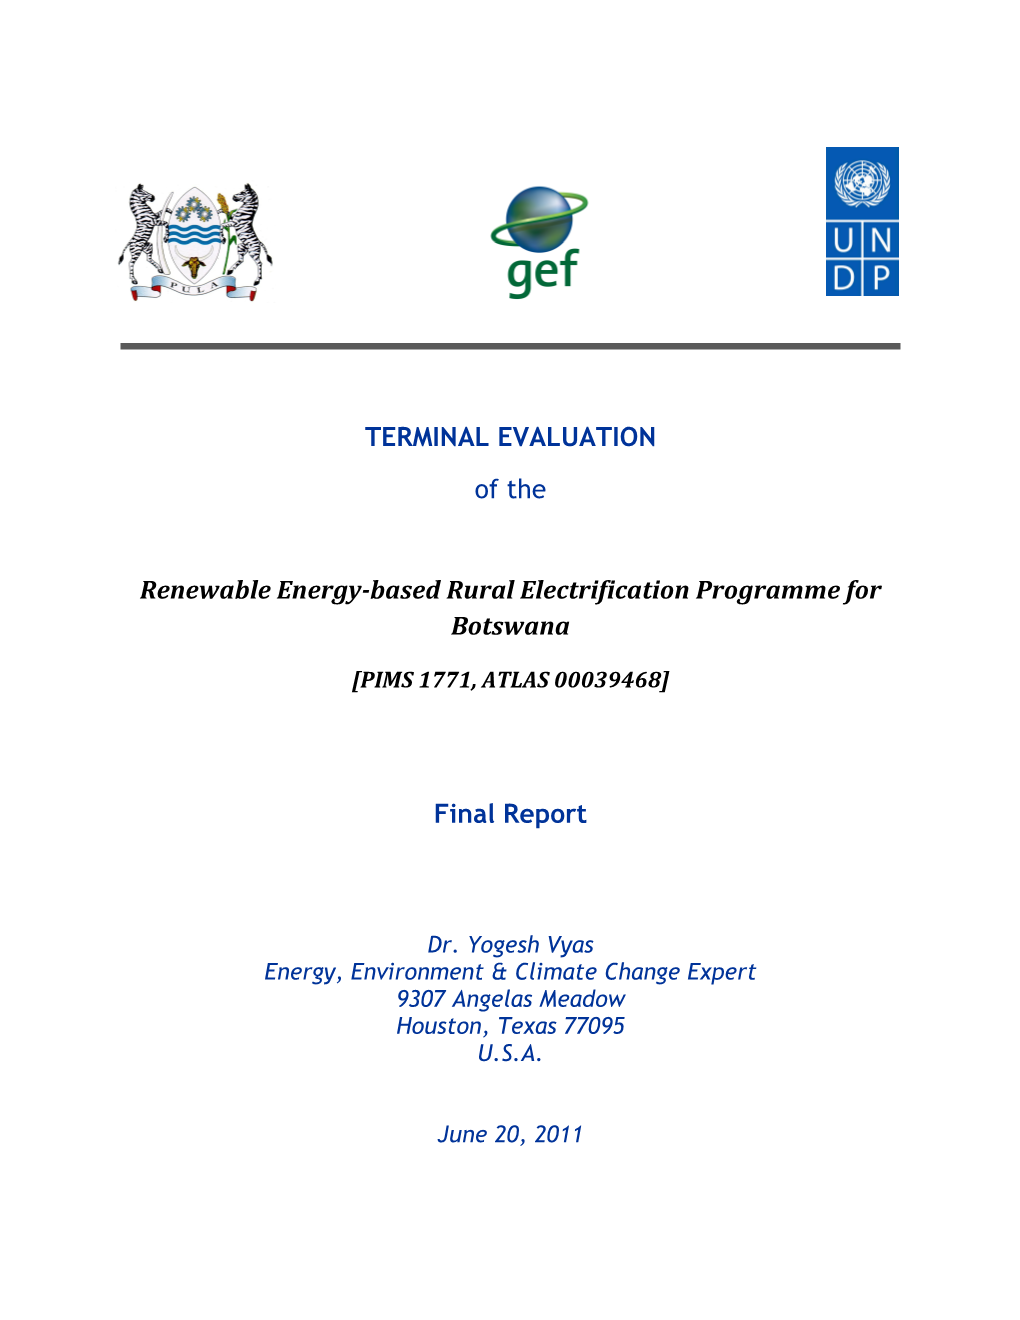 Terminal Evaluation of the Renewable Energy-Based Rural Electrification Programme for Botswana Page Ii